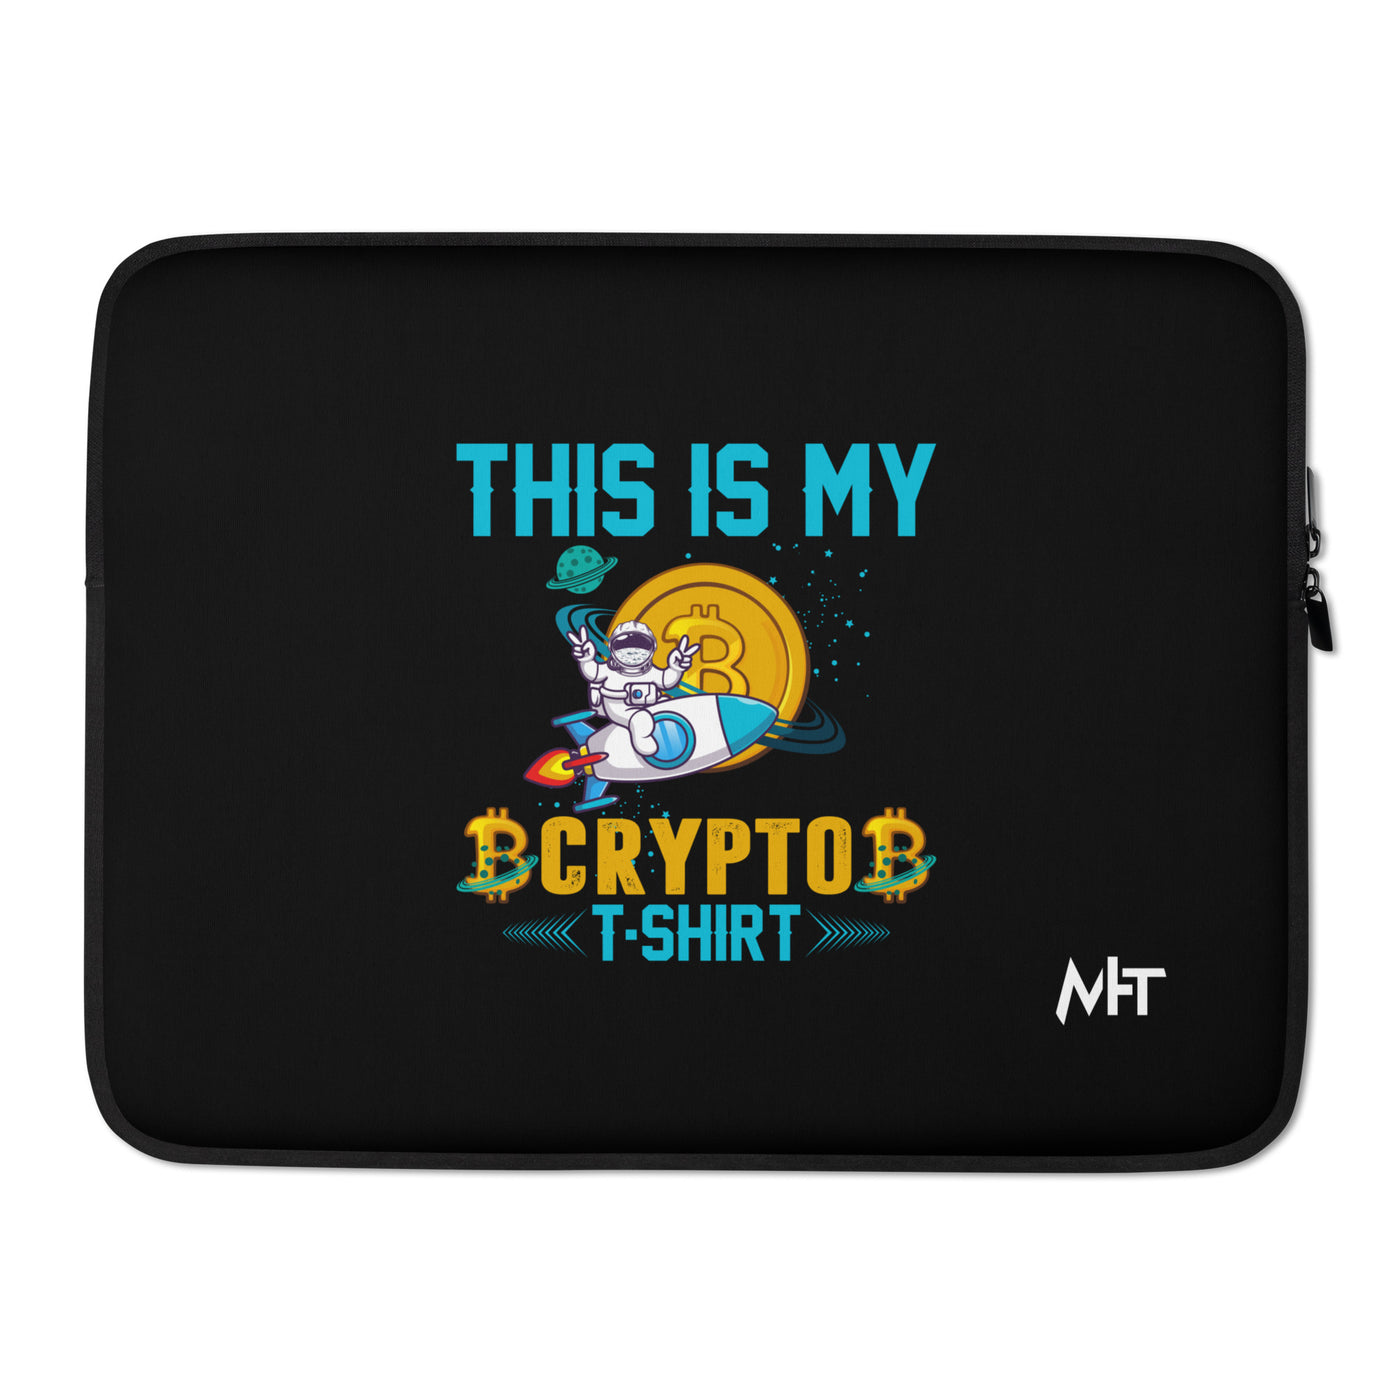 This is my Crypto T-shirt with Turtle Ninja and Missile - Laptop Sleeve